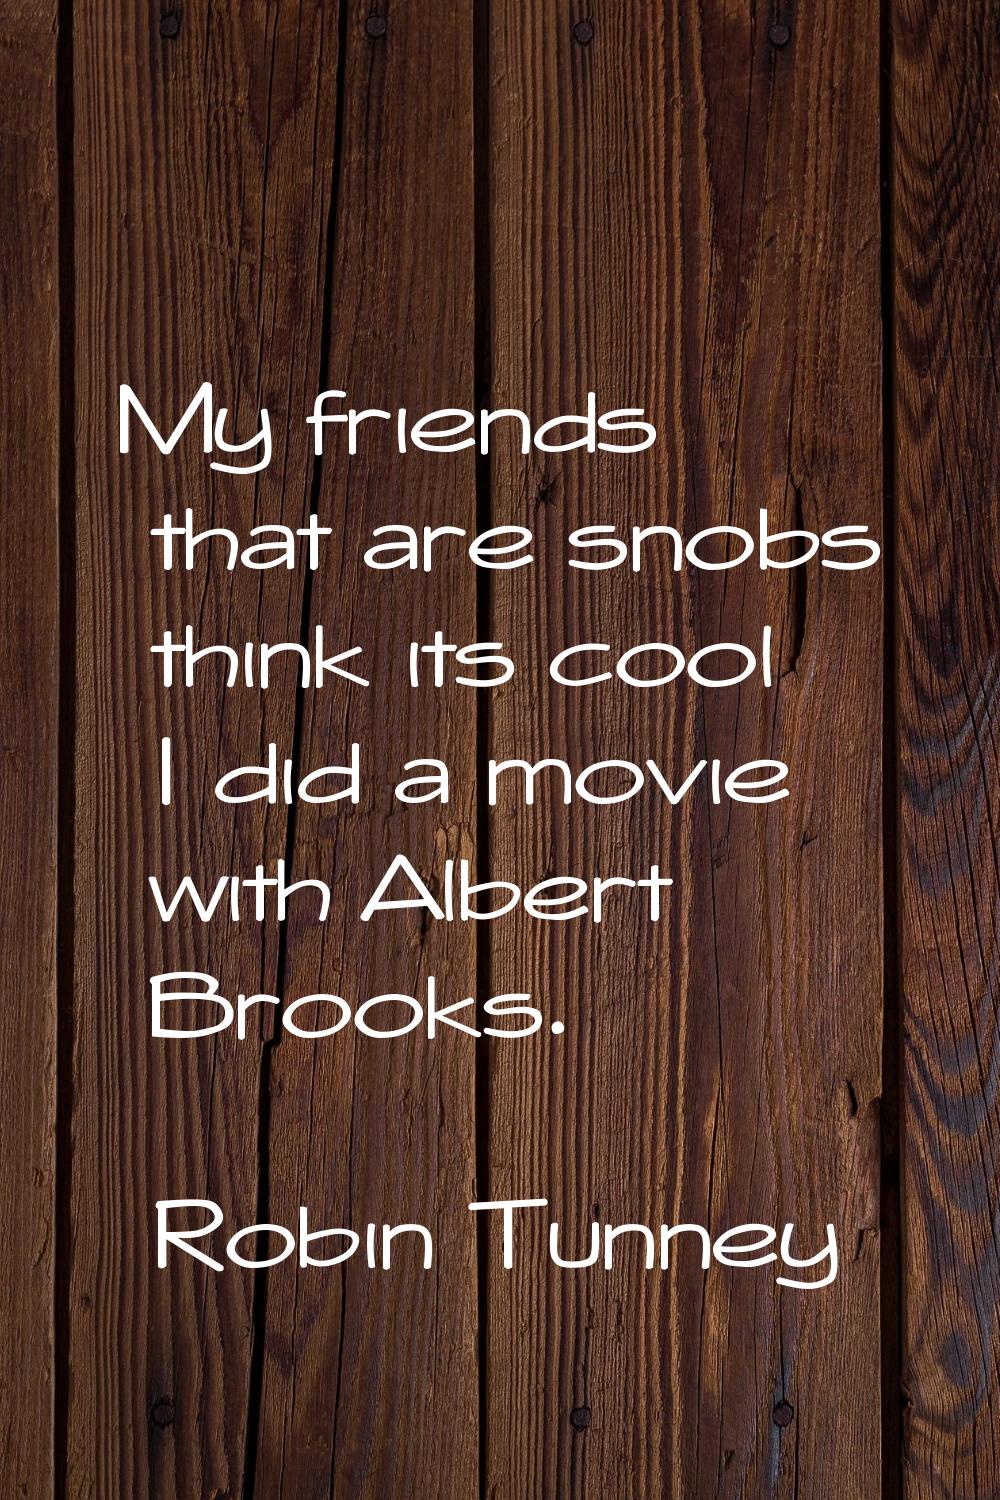 My friends that are snobs think its cool I did a movie with Albert Brooks.